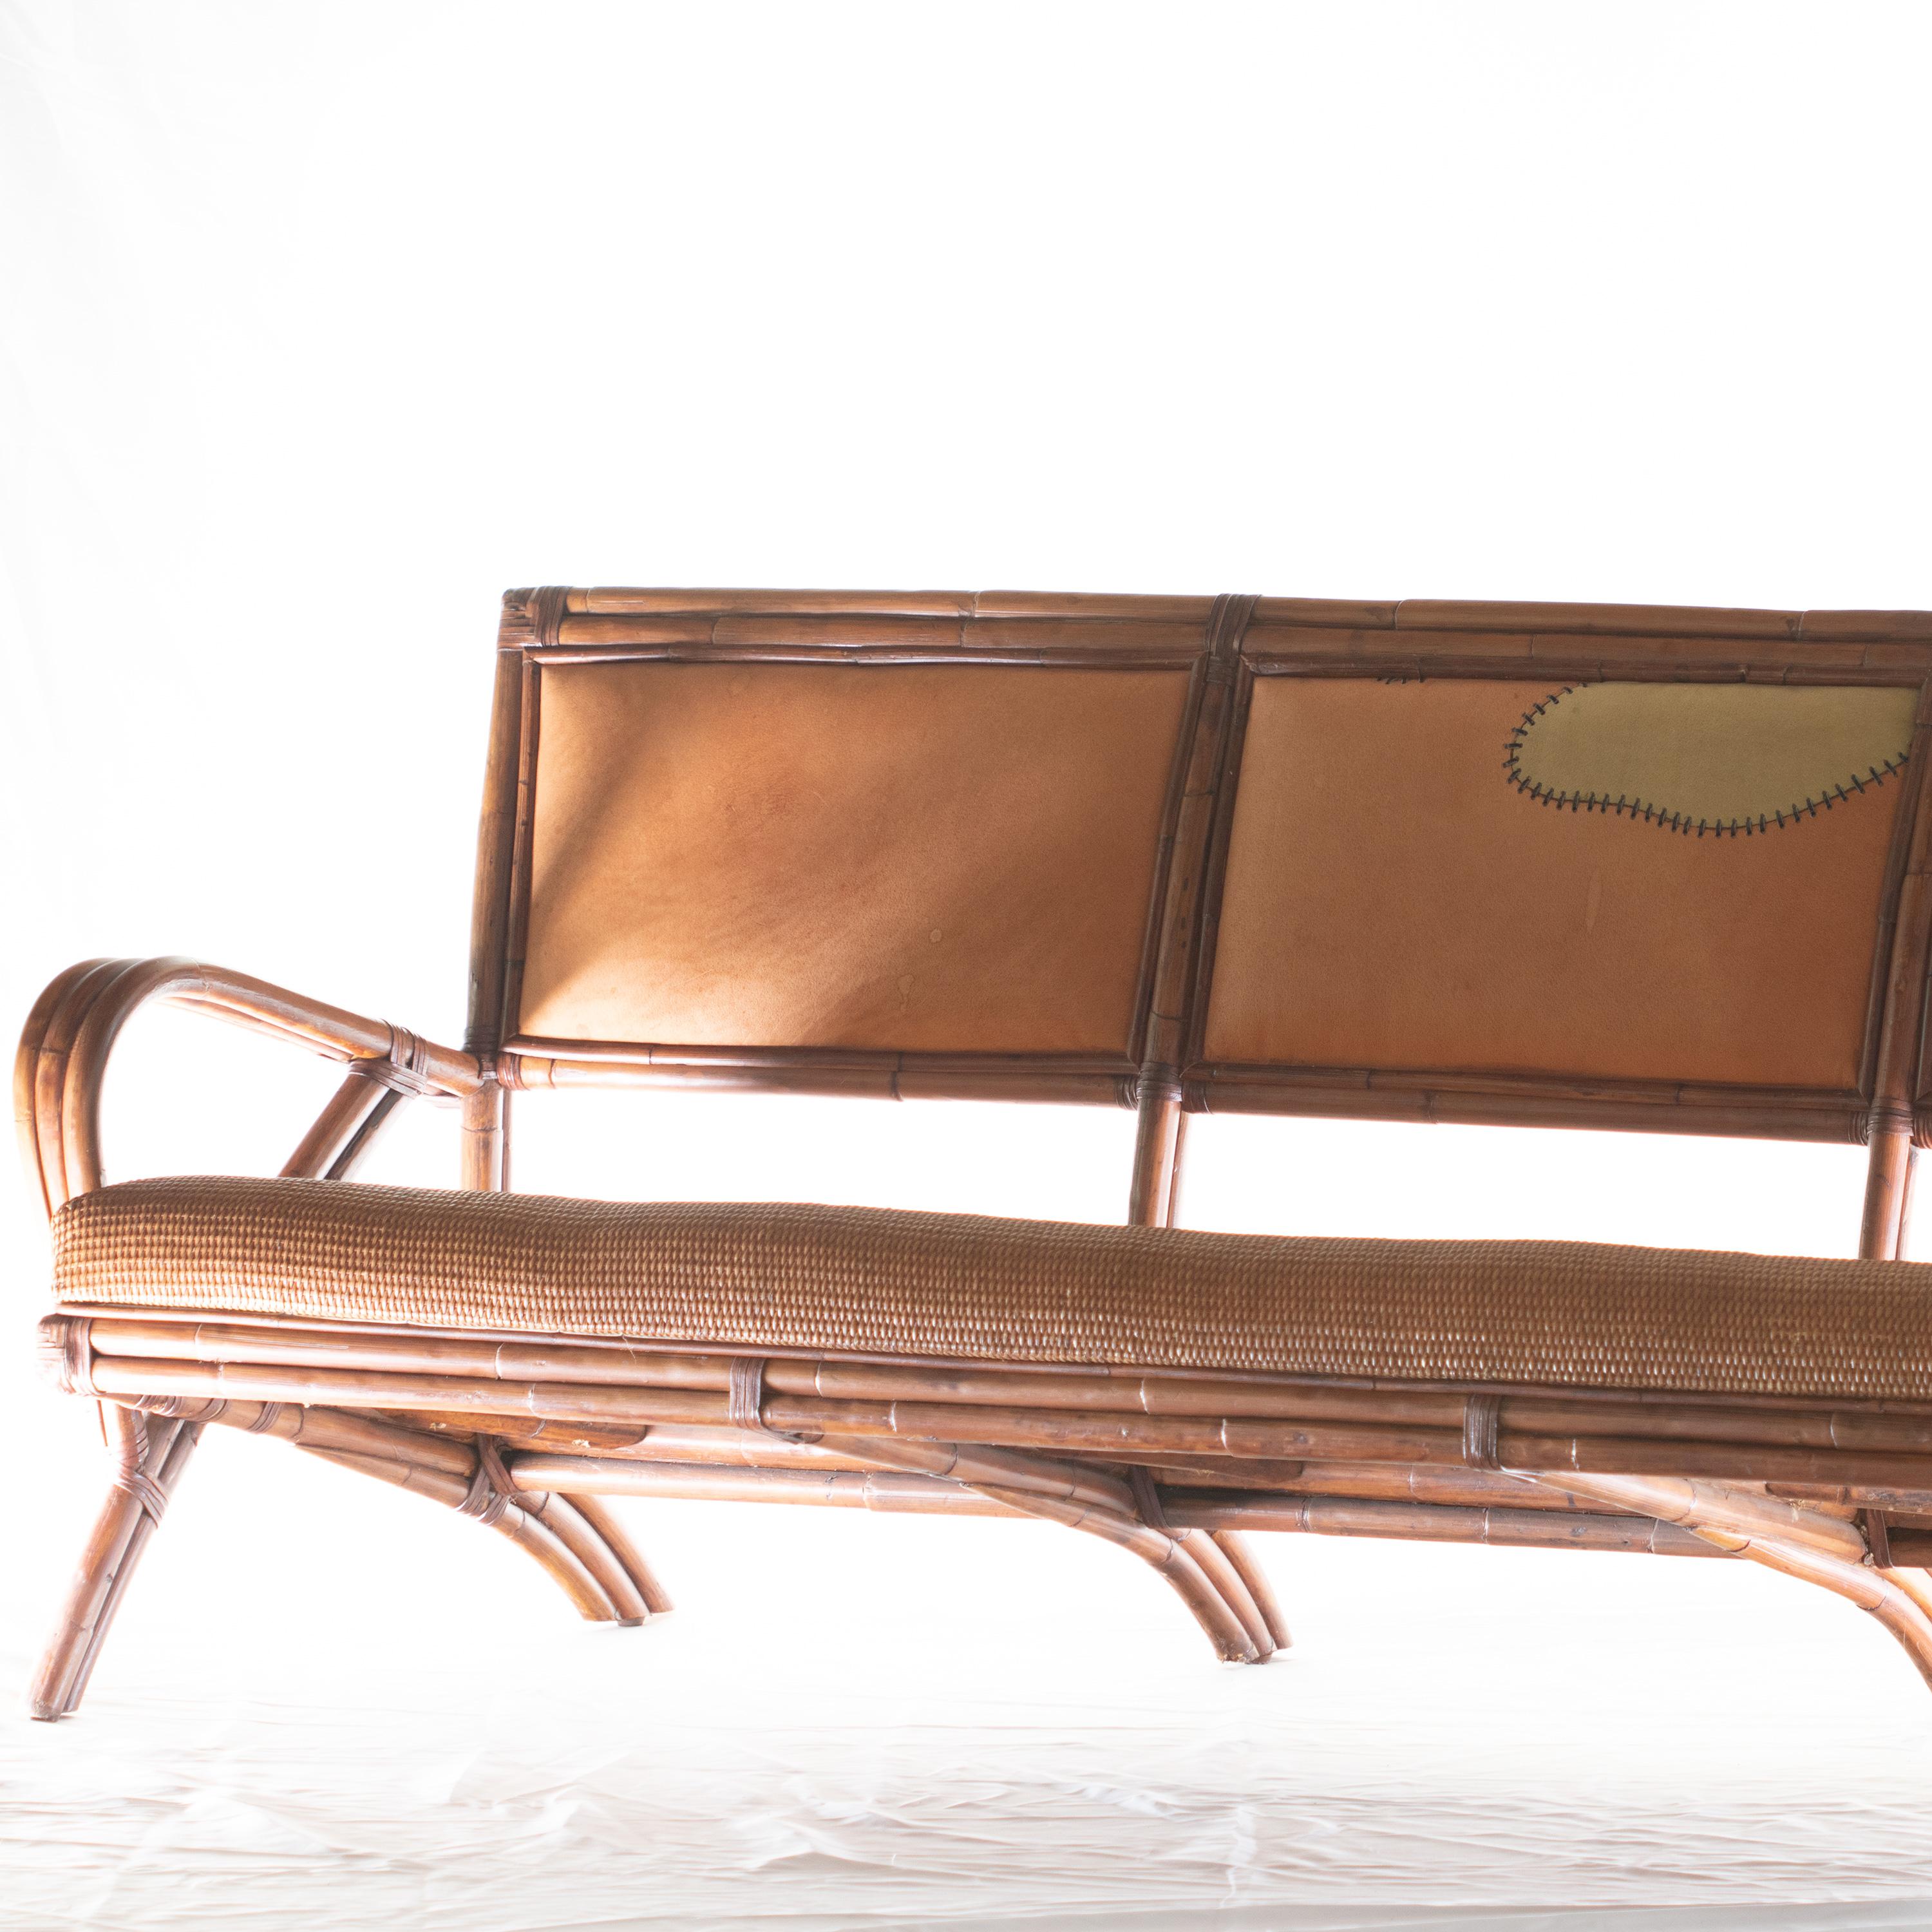 Modern straight and big sofa (4 seats) designed by Ramon Castellano (spanish designer), stamped for Kalma in Bamboo Wood, 20th Century. Collapsible rattan base reinforced with wrought iron. Seat is framed in rattan and crown is in wood. Bindings in